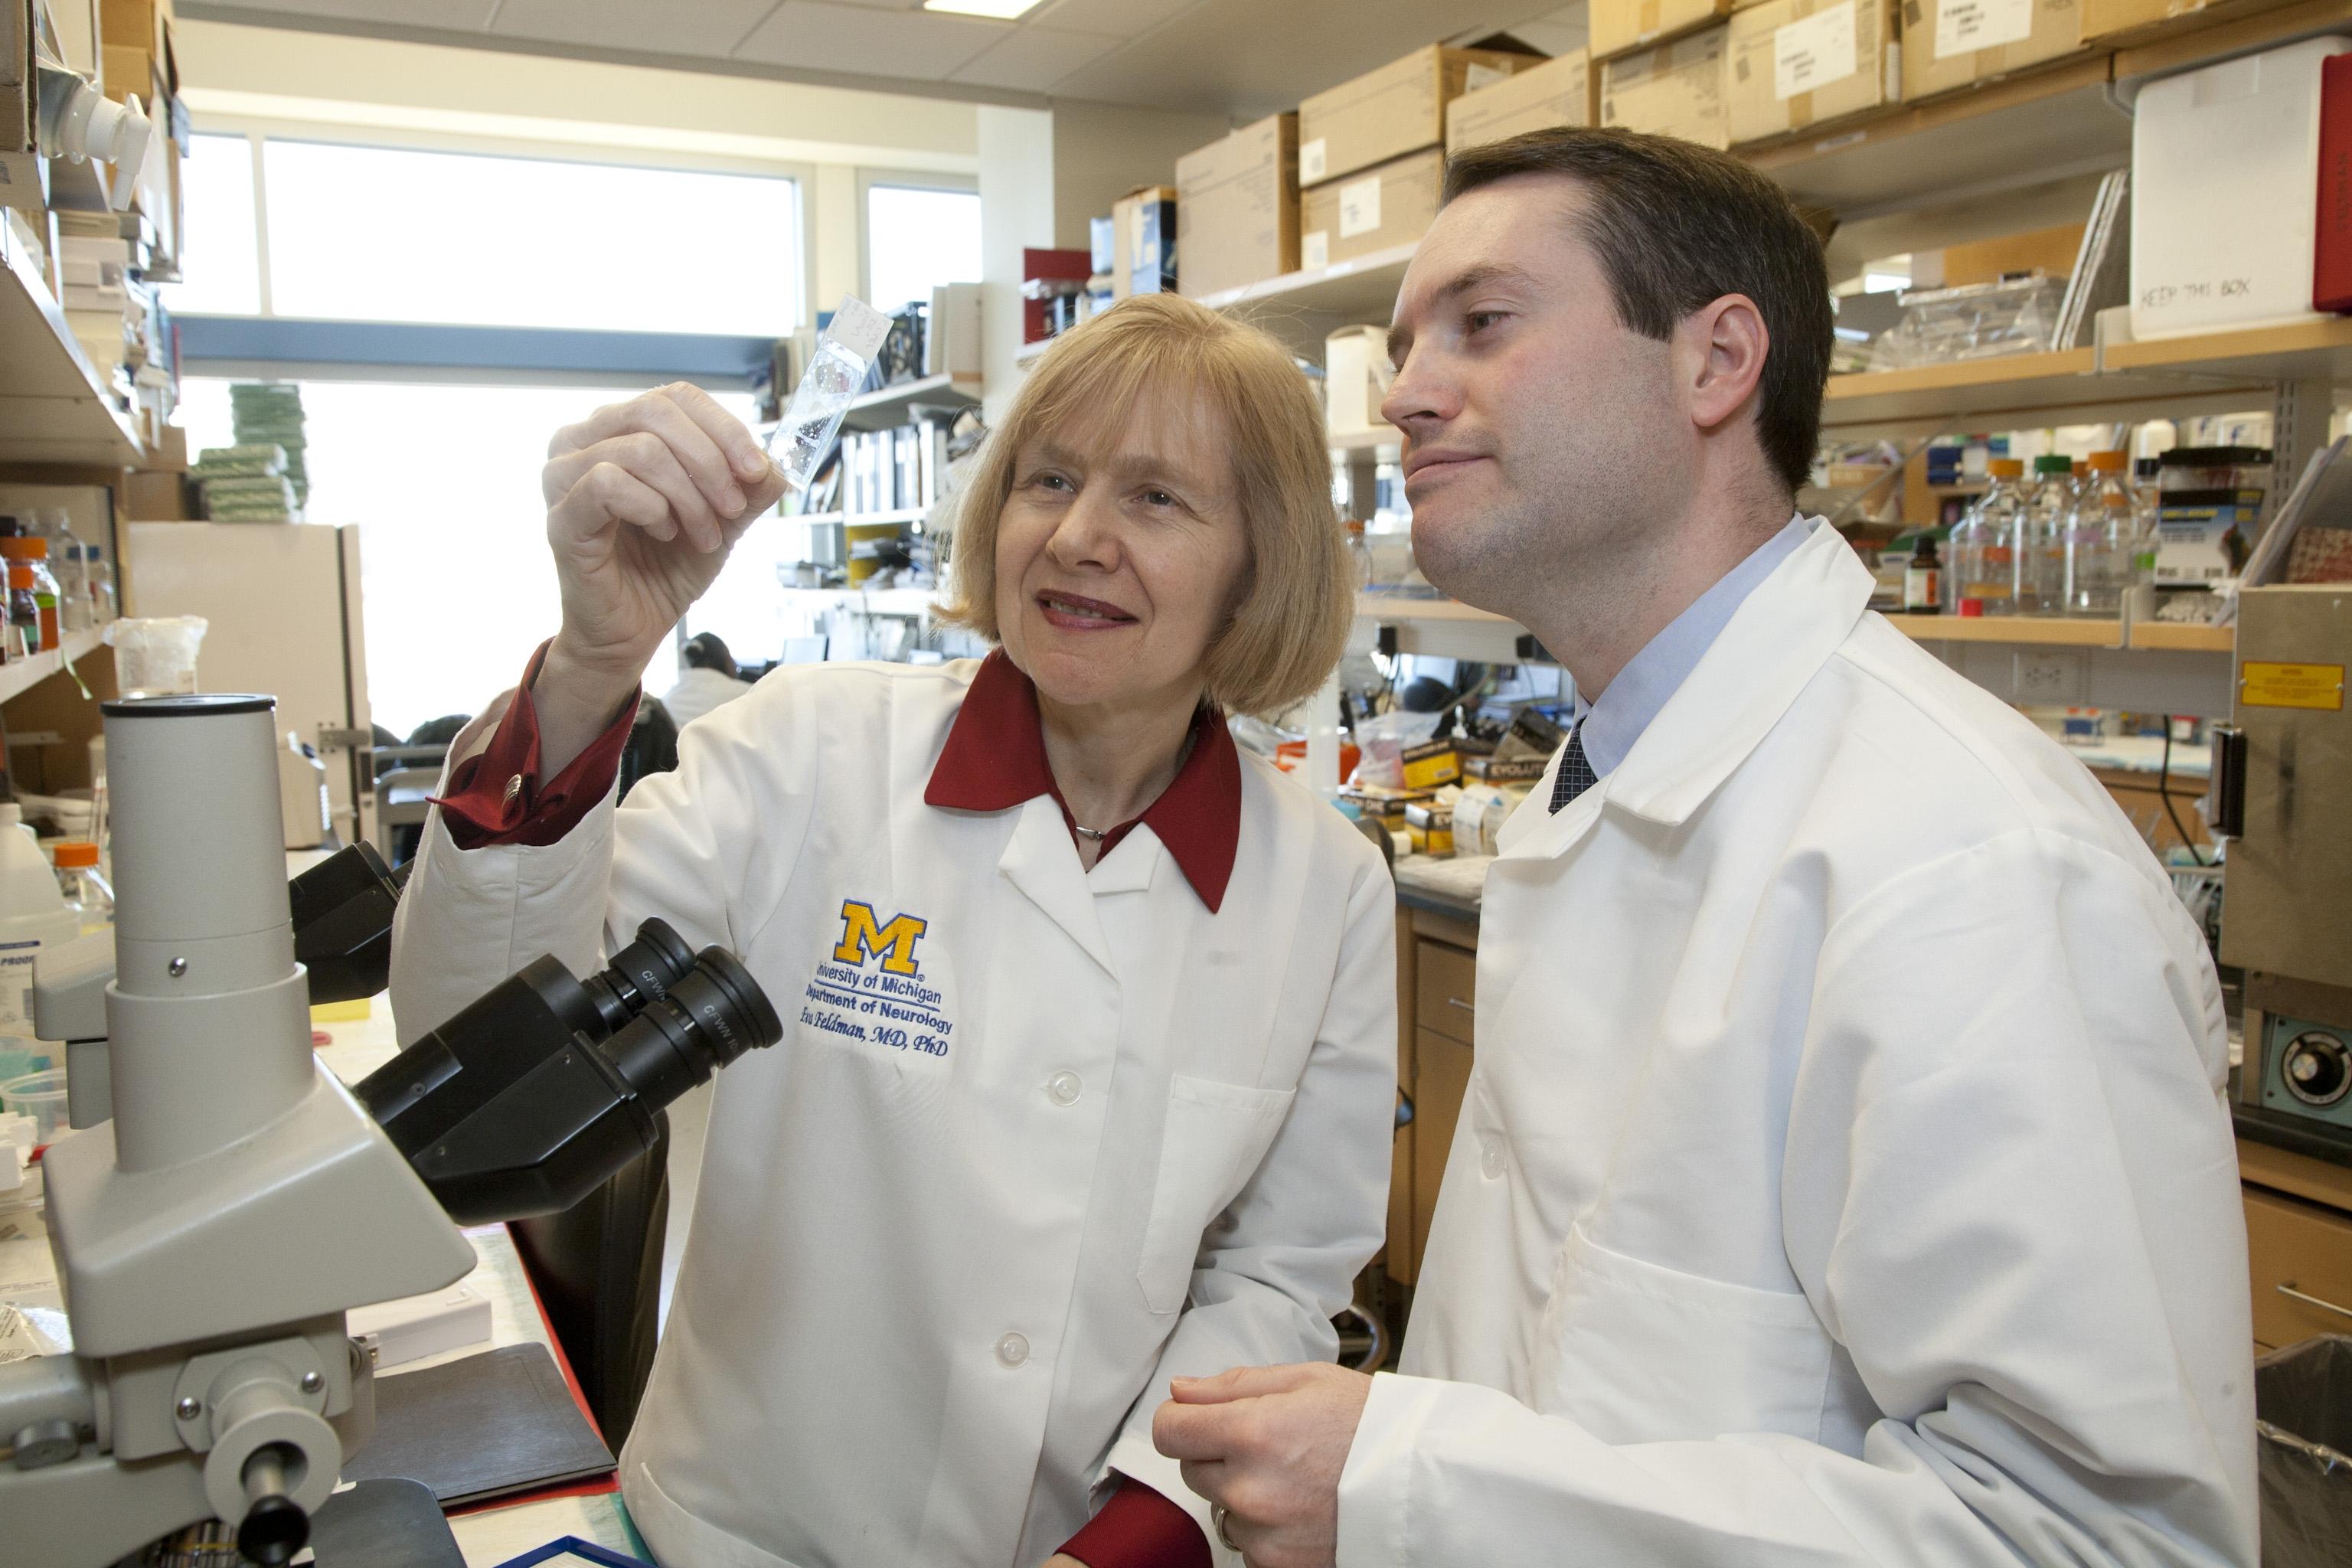 Drs. Eva Feldman and Brian Callaghan in the NeuroNetwork for Emerging Therapies Lab